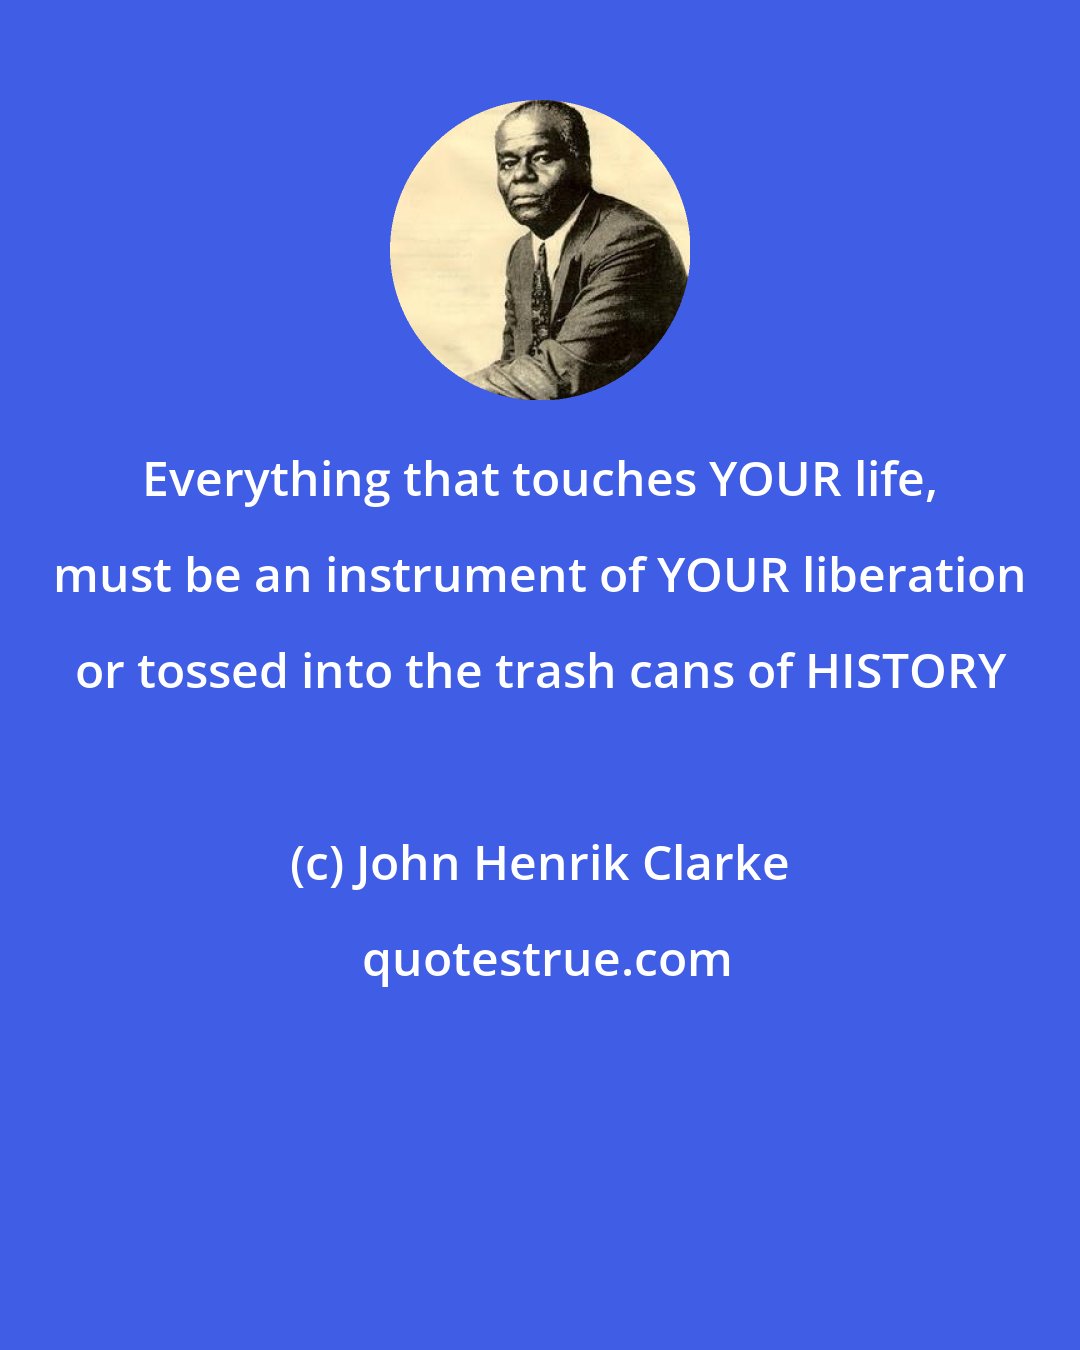 John Henrik Clarke: Everything that touches YOUR life, must be an instrument of YOUR liberation or tossed into the trash cans of HISTORY